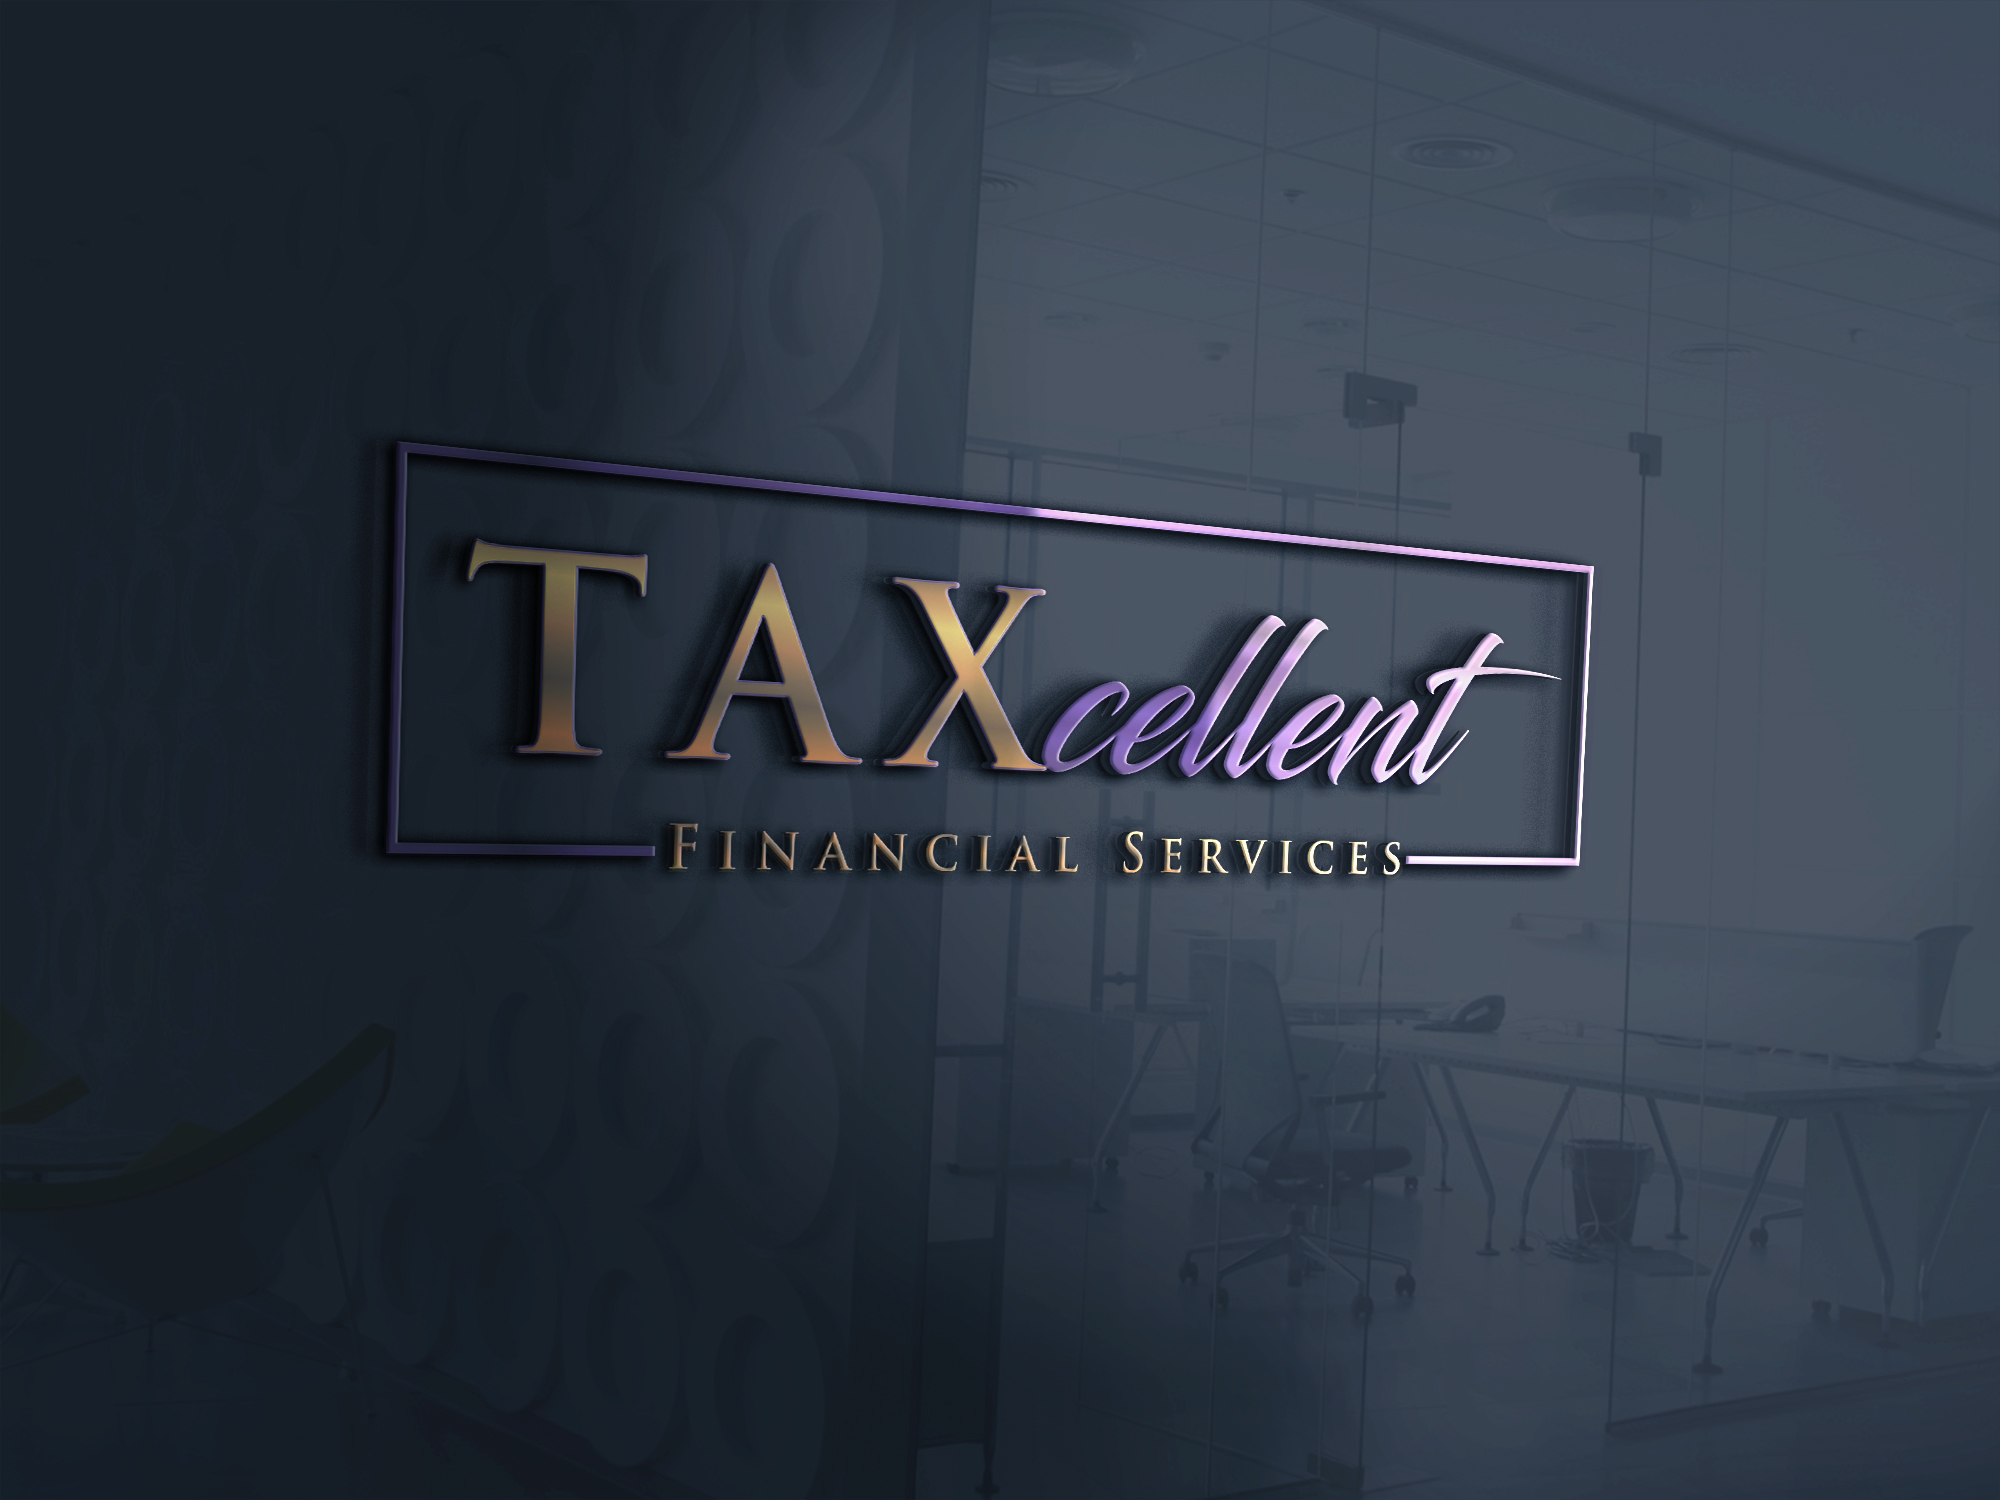 TAXcellent Financial Svcs - Tax Relief Firm